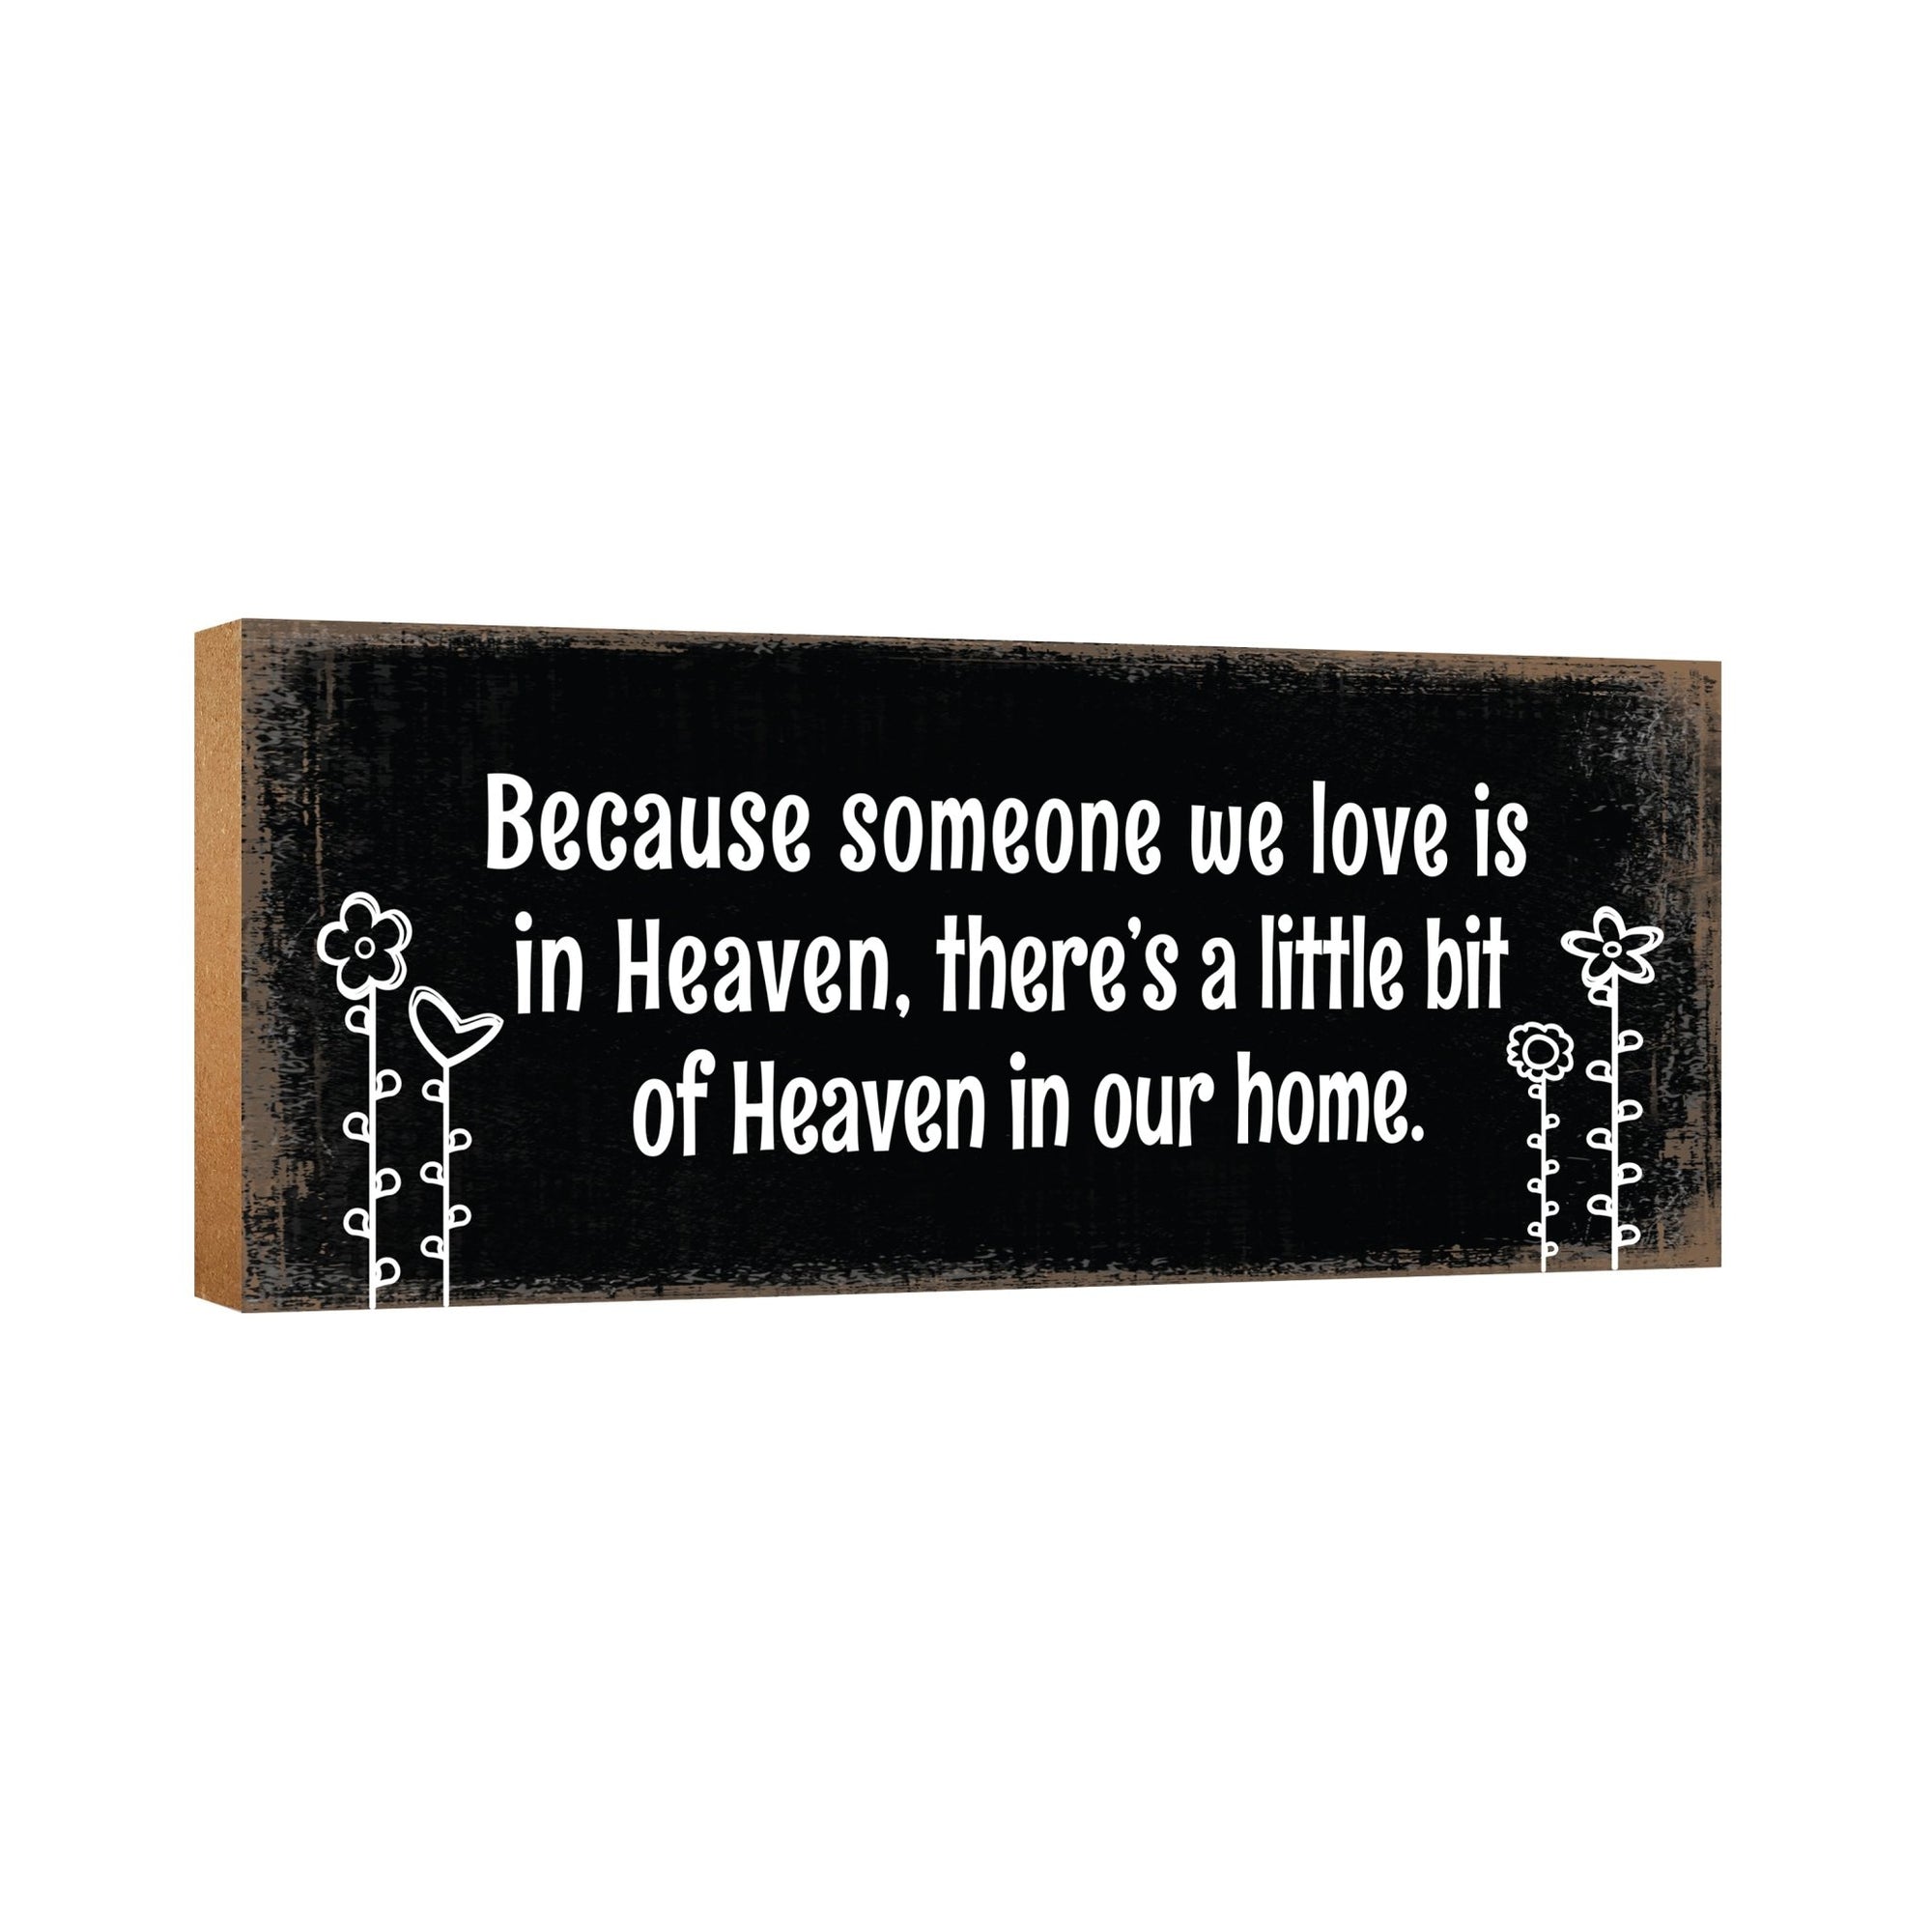 Modern Inspirational Pet Memorial 4x10 inches Wooden Sign (Because Someone) Tabletop Plaque Home Decoration Loss of Pet Bereavement Sympathy Keepsake - LifeSong Milestones